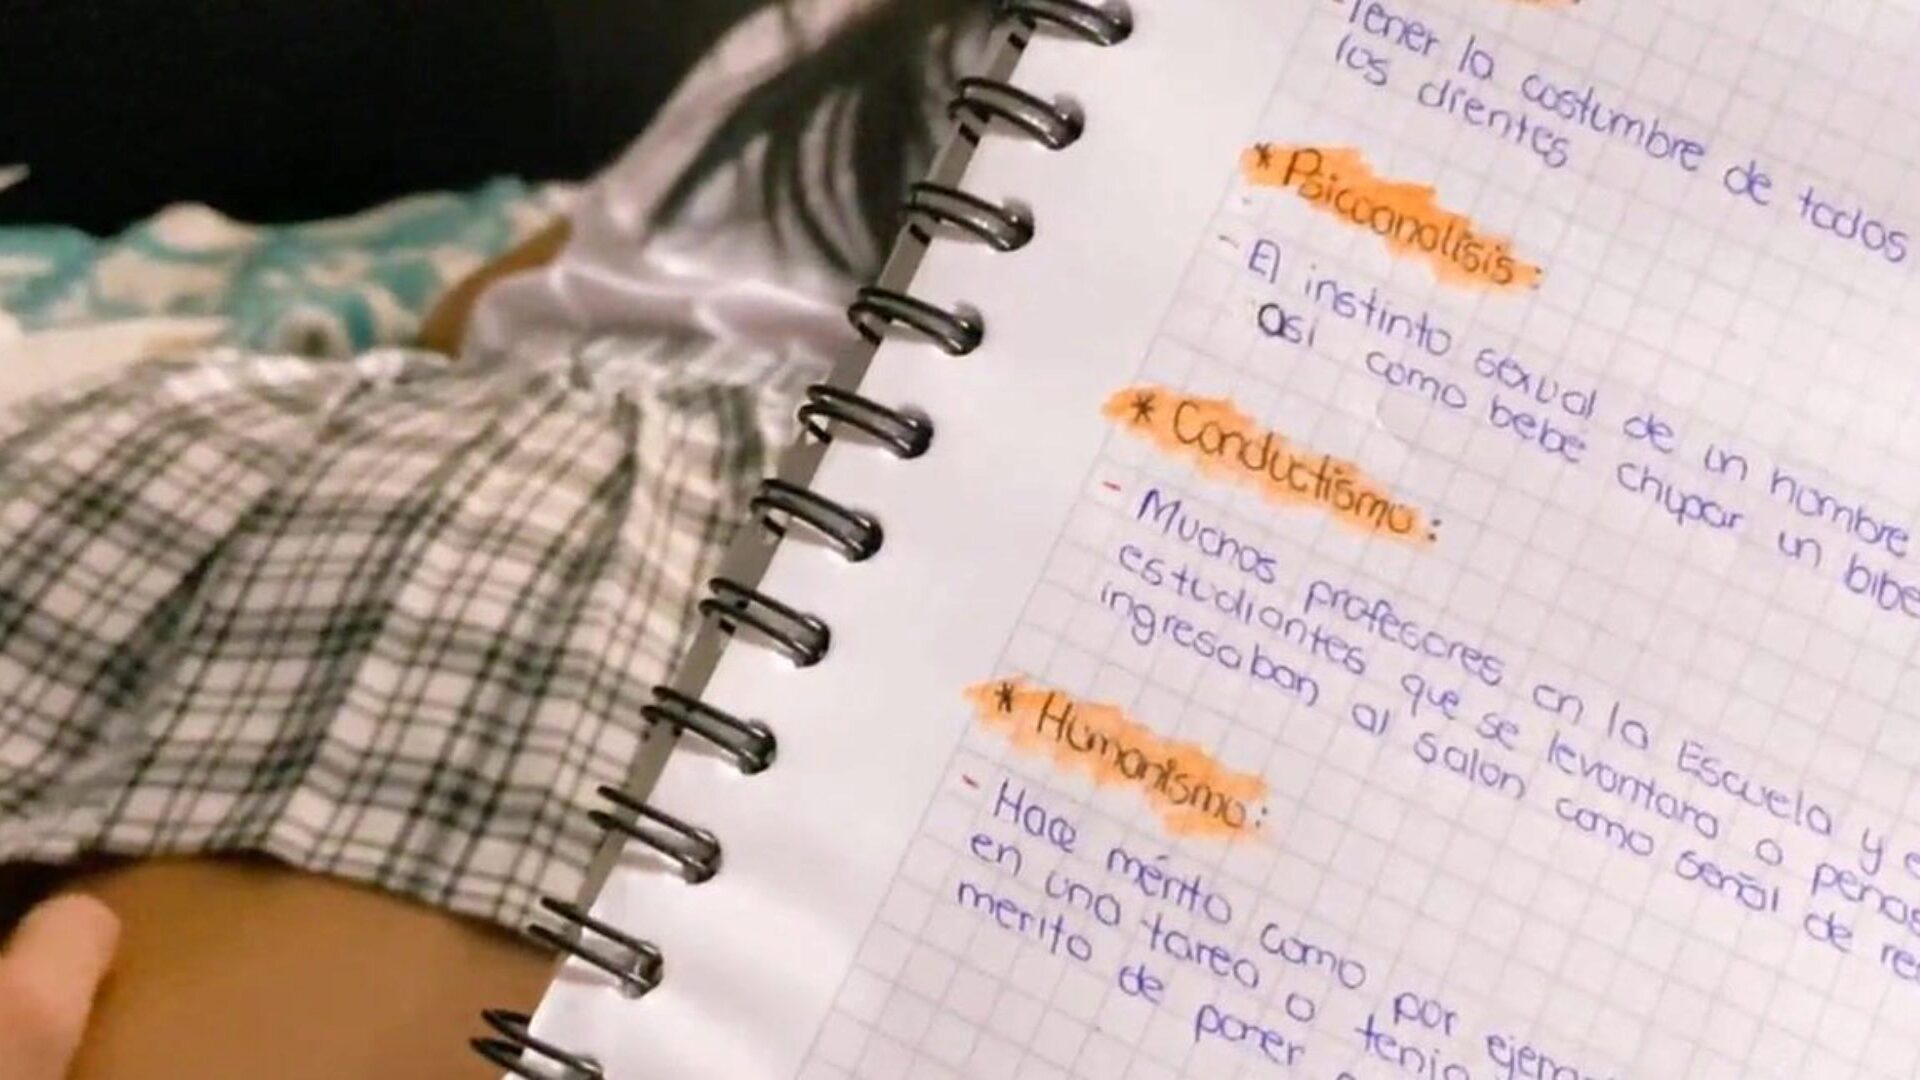 I FUCKED MY CLASSMATE WHILE WE STUDIED AT HER HOME